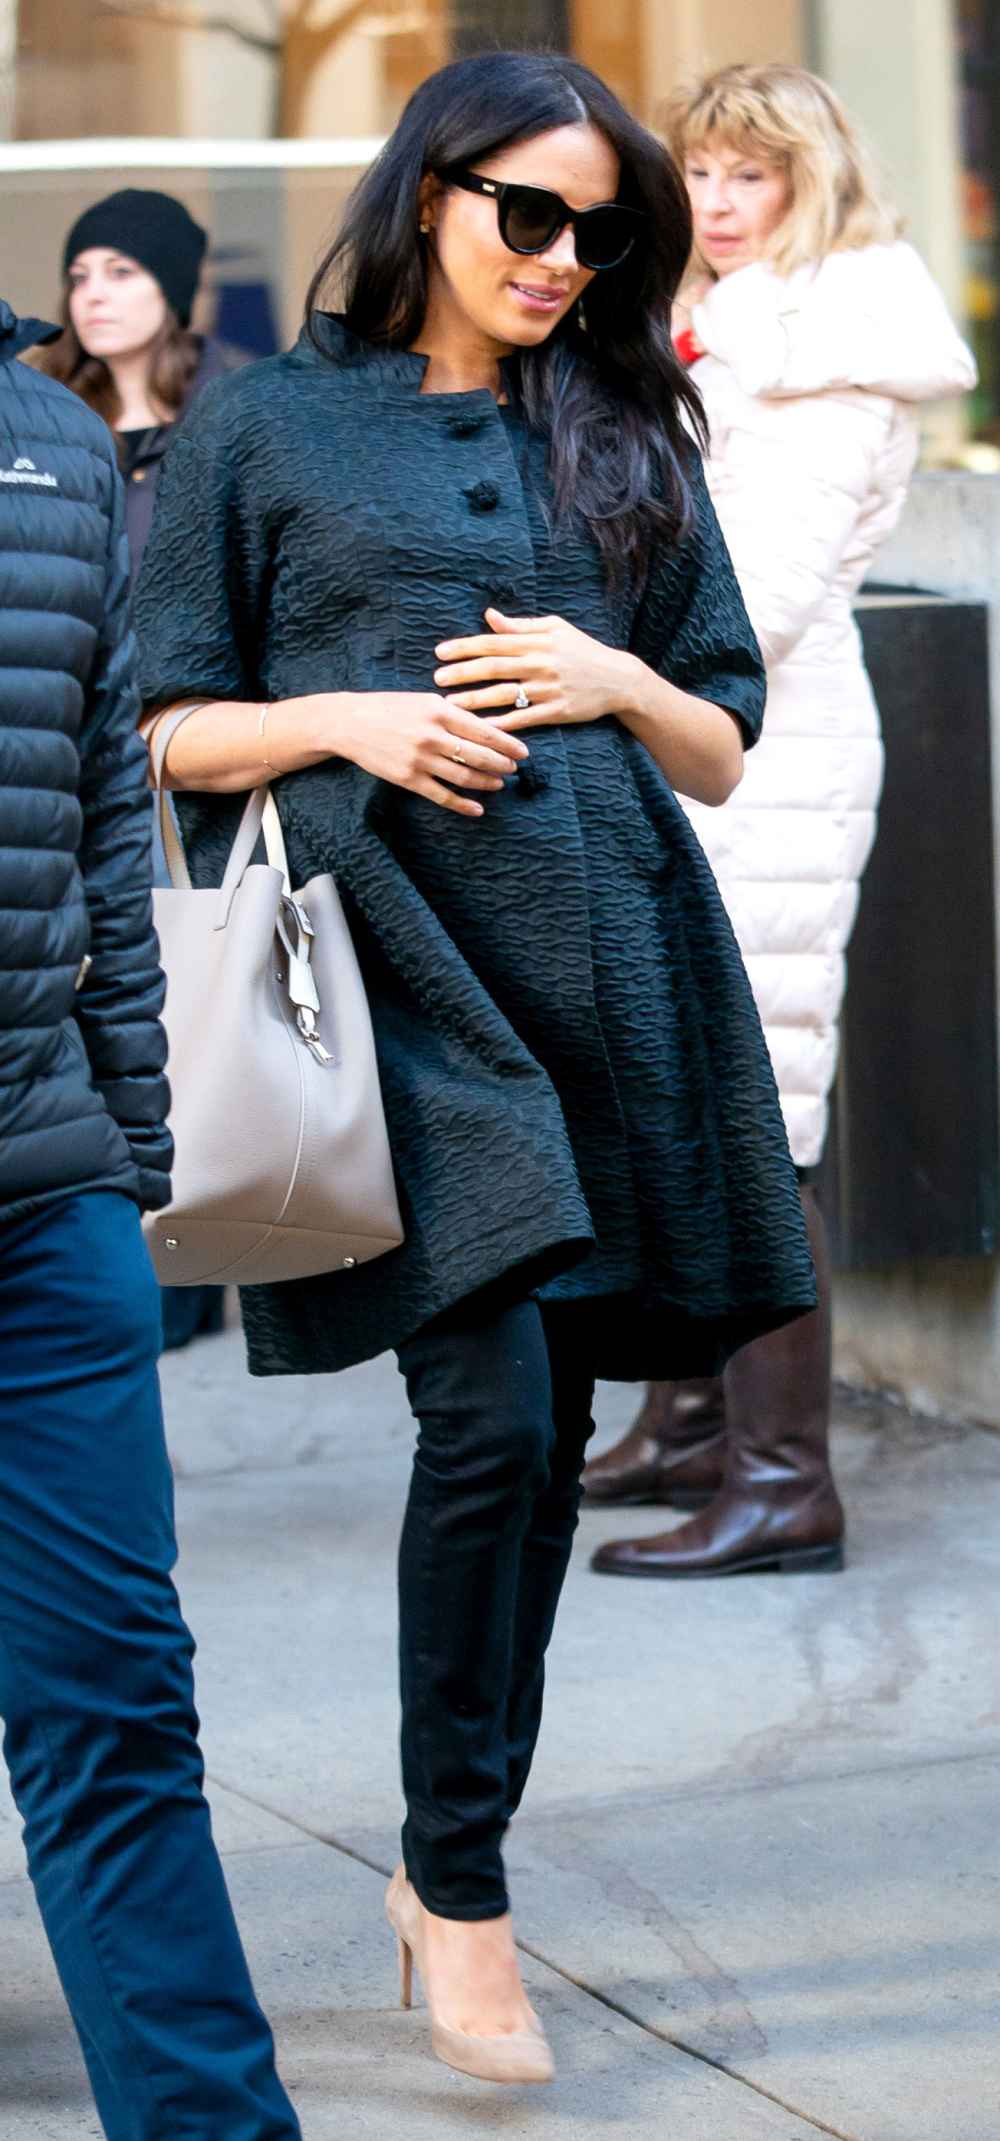 Duchess Meghan Celebrates With New York City Baby Shower: Details